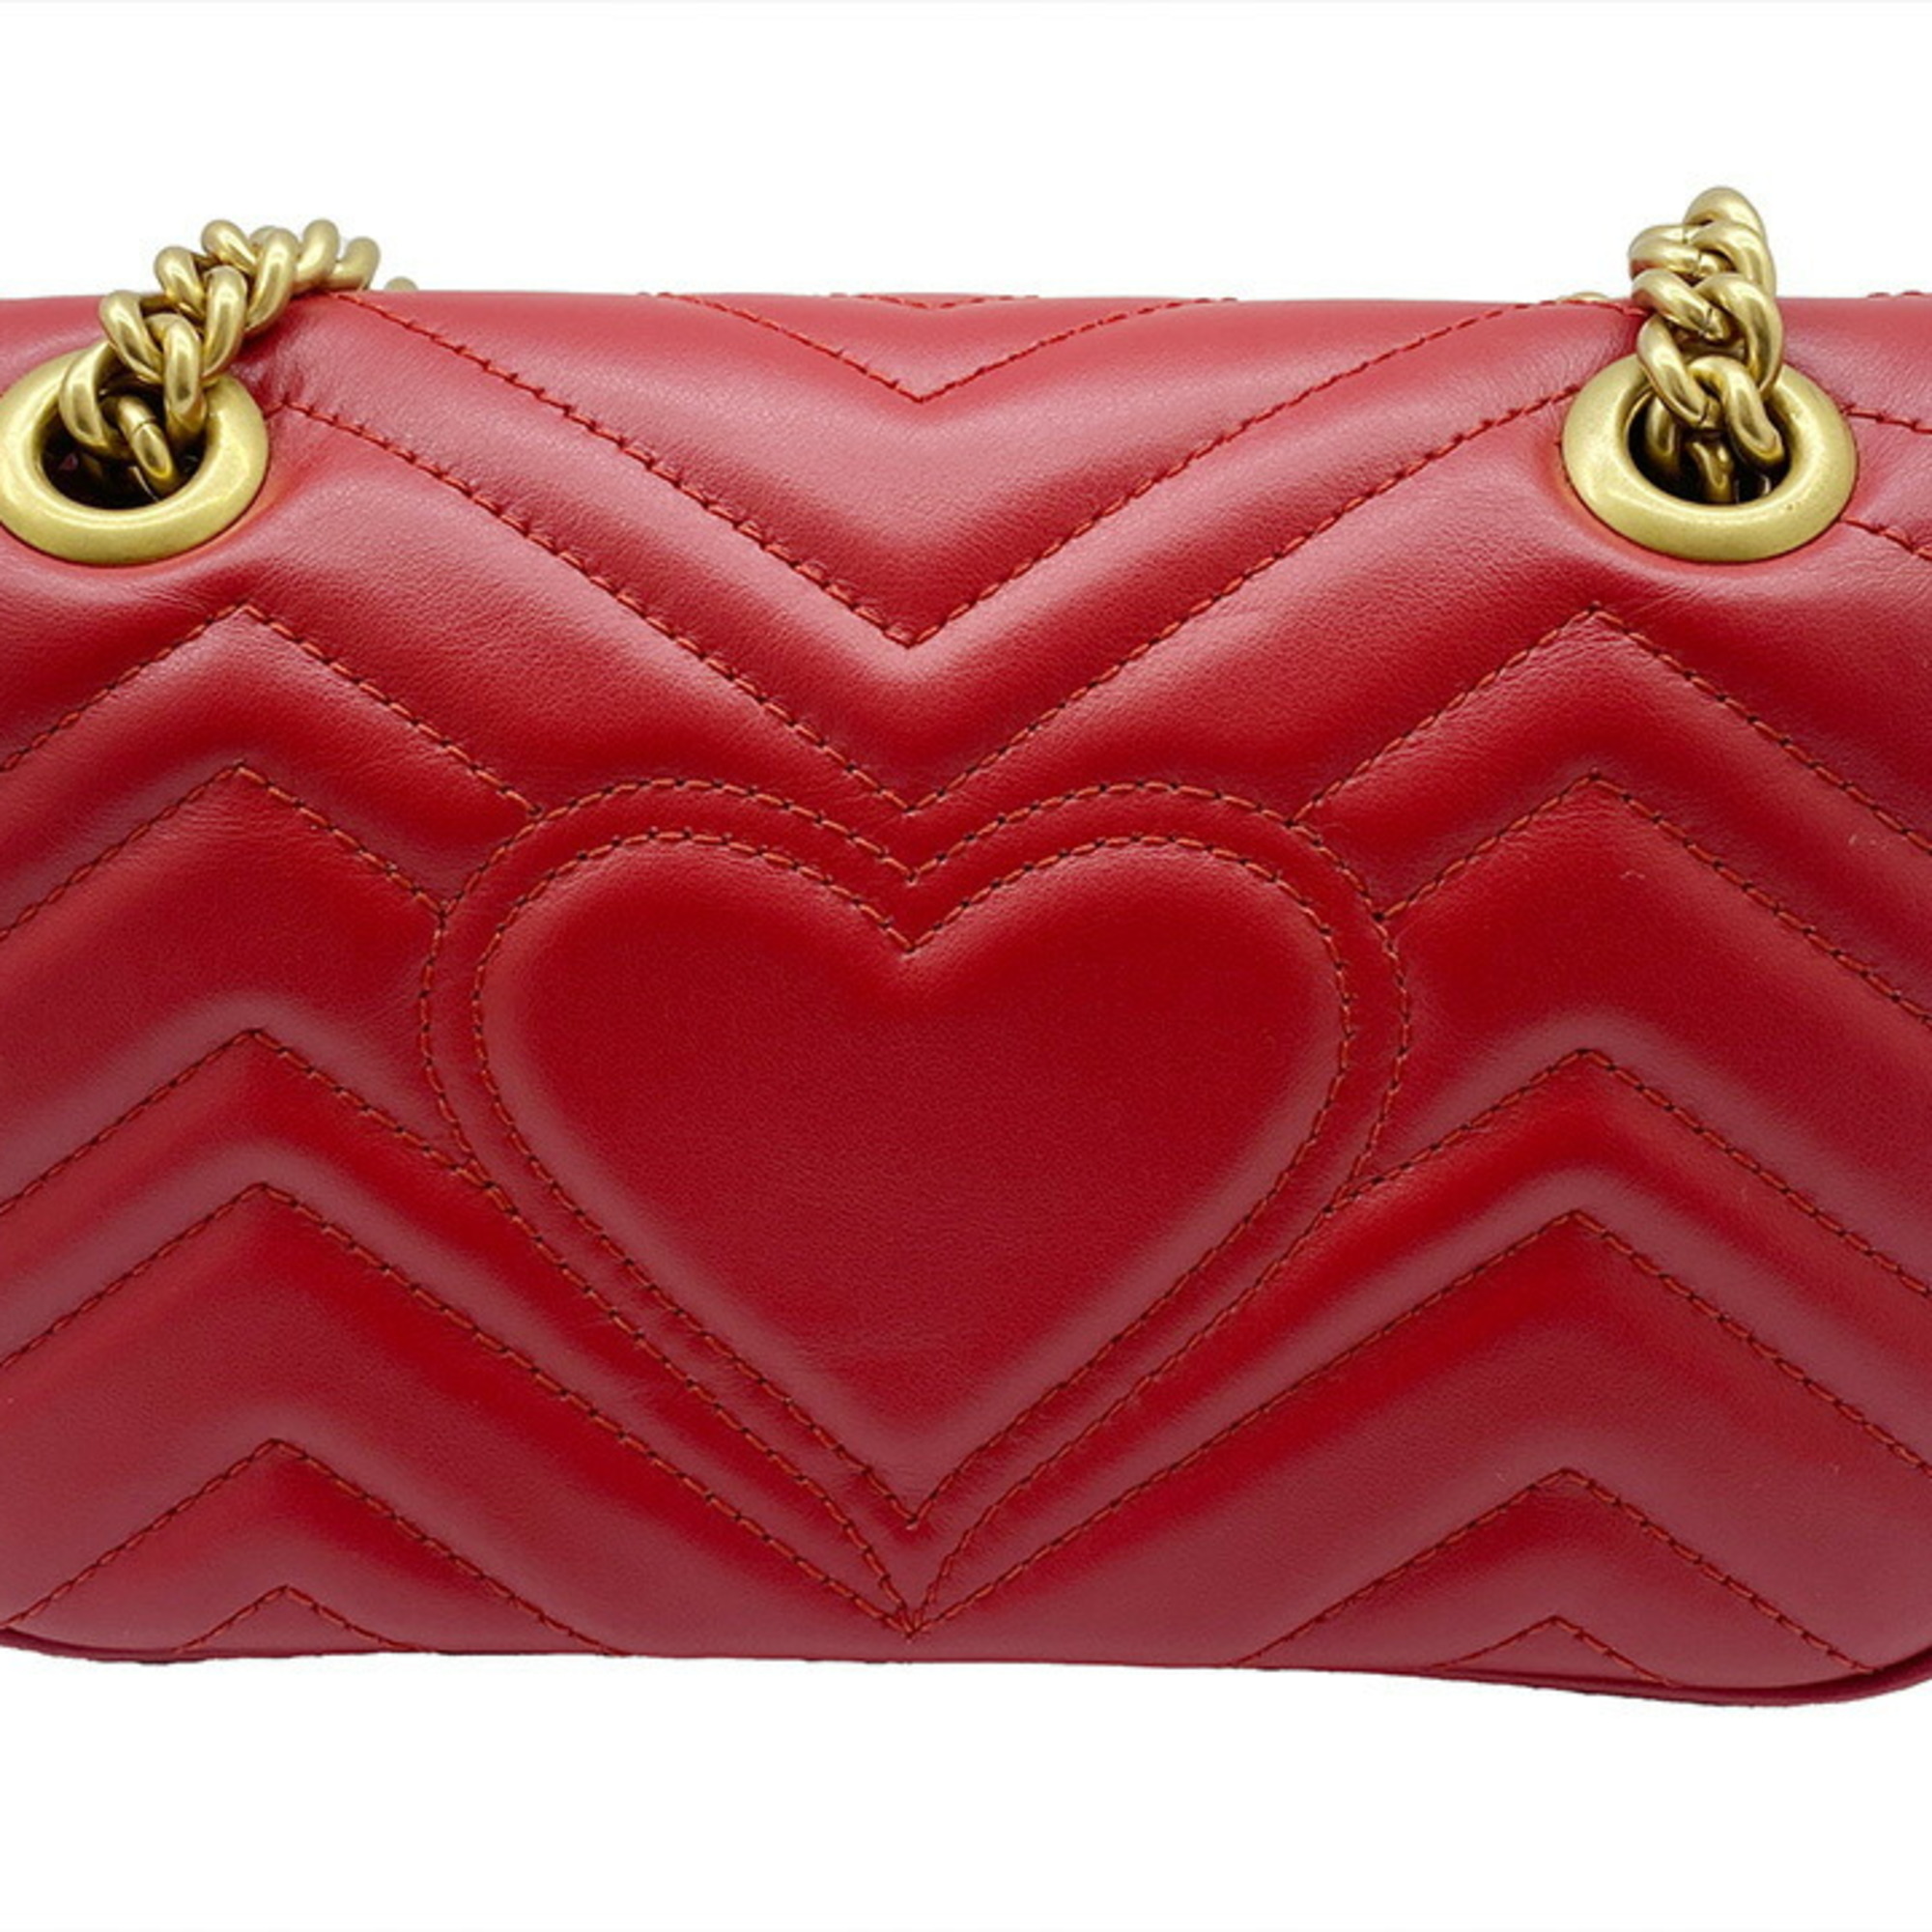 GUCCI Gucci GG Marmont Quilted Bag Shoulder Leather Red 446744 Chain Double G Product Ladies